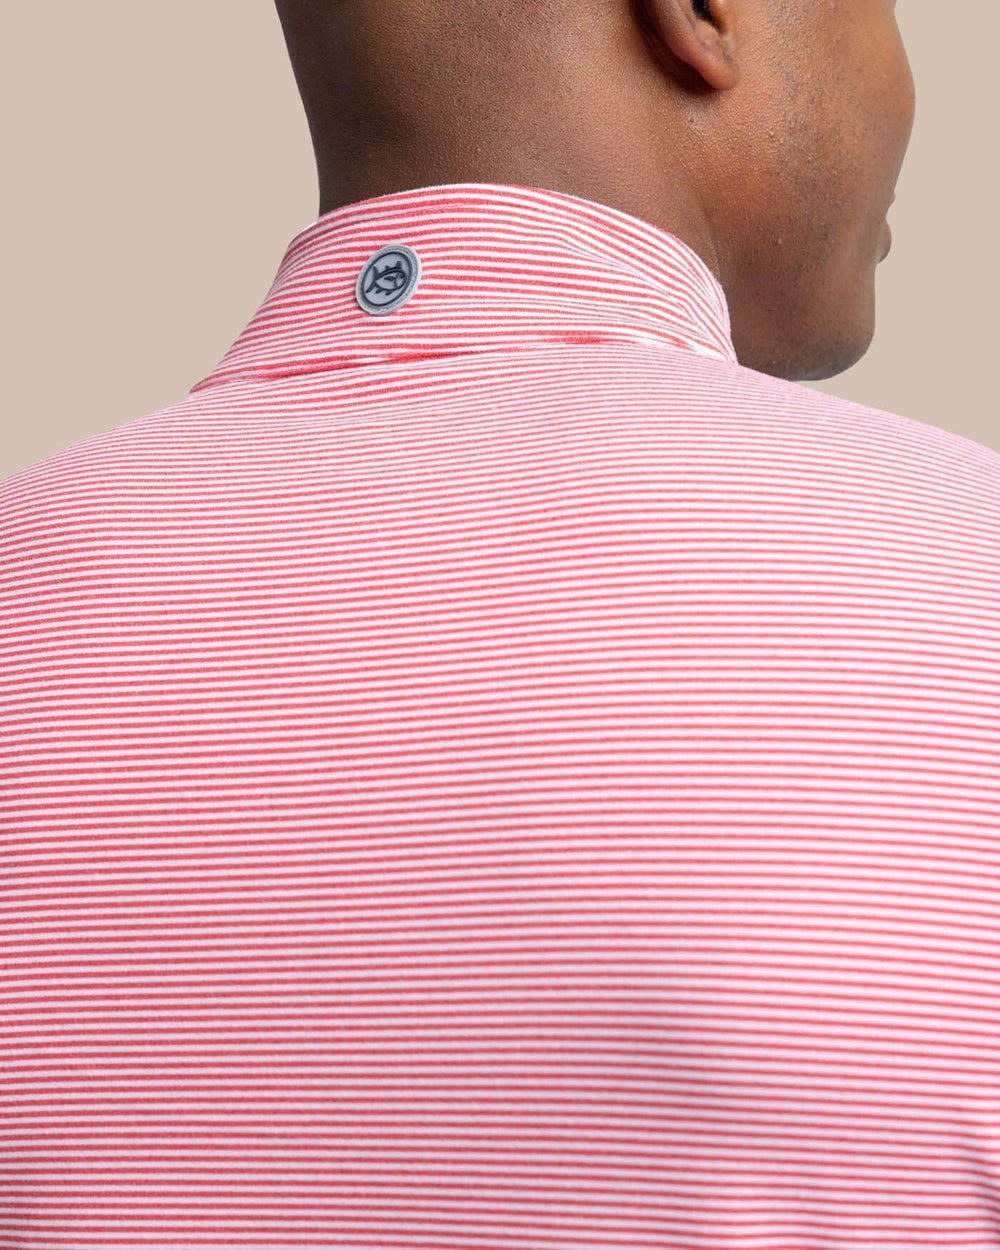 The yoke view of the Southern Tide Cruiser Micro-Stripe Heather Quarter Zip by Southern Tide - Heather Varsity Red